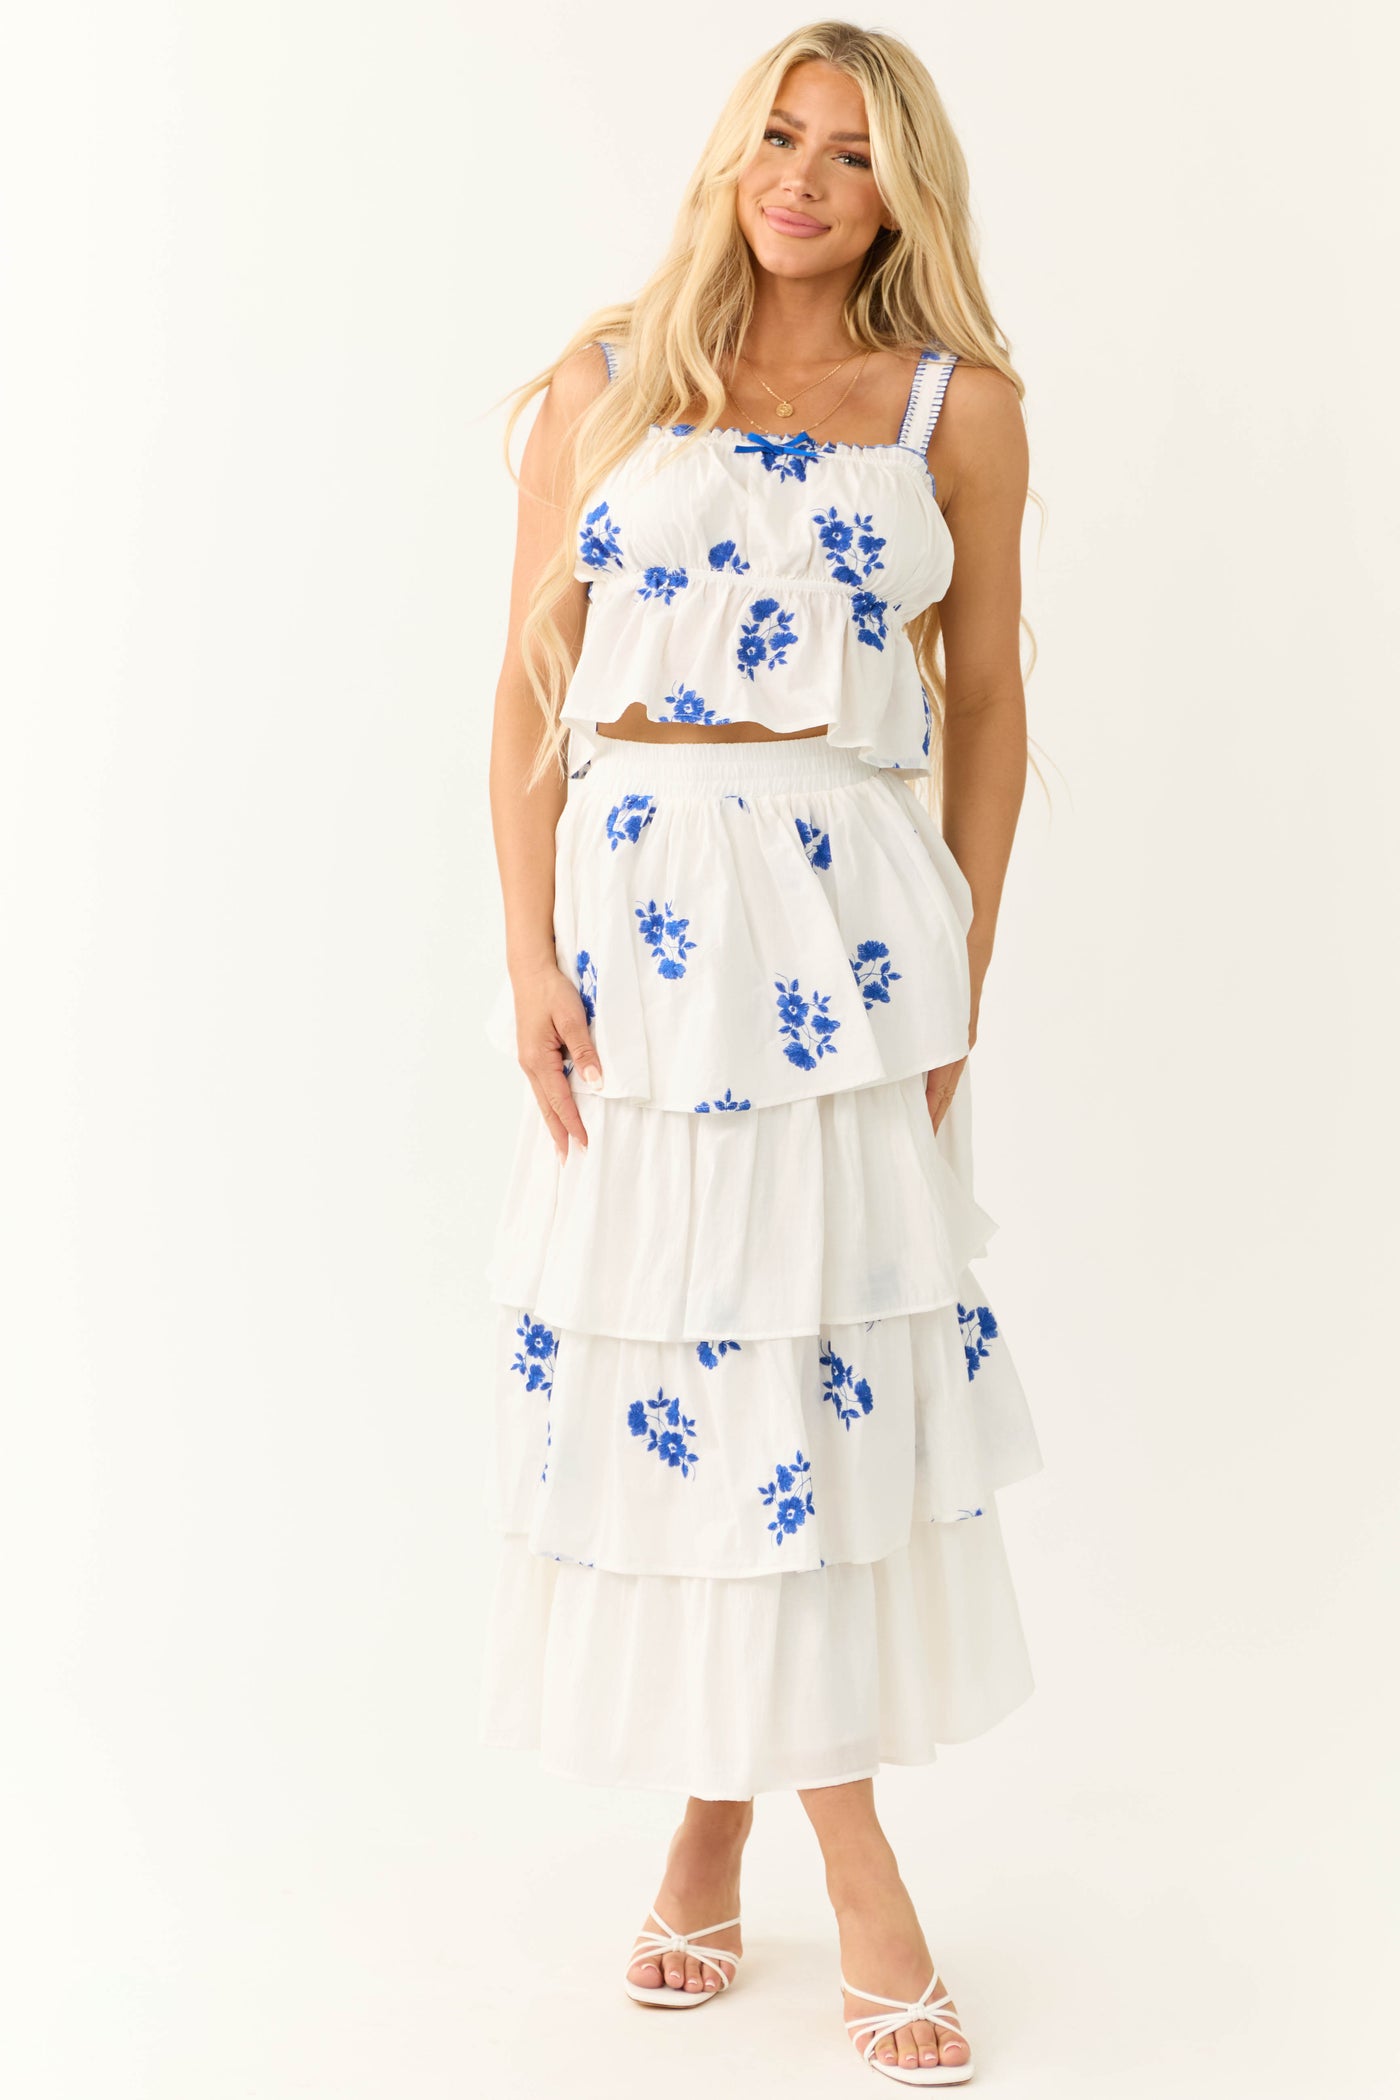 White and Cobalt Floral Embroidered Skirt